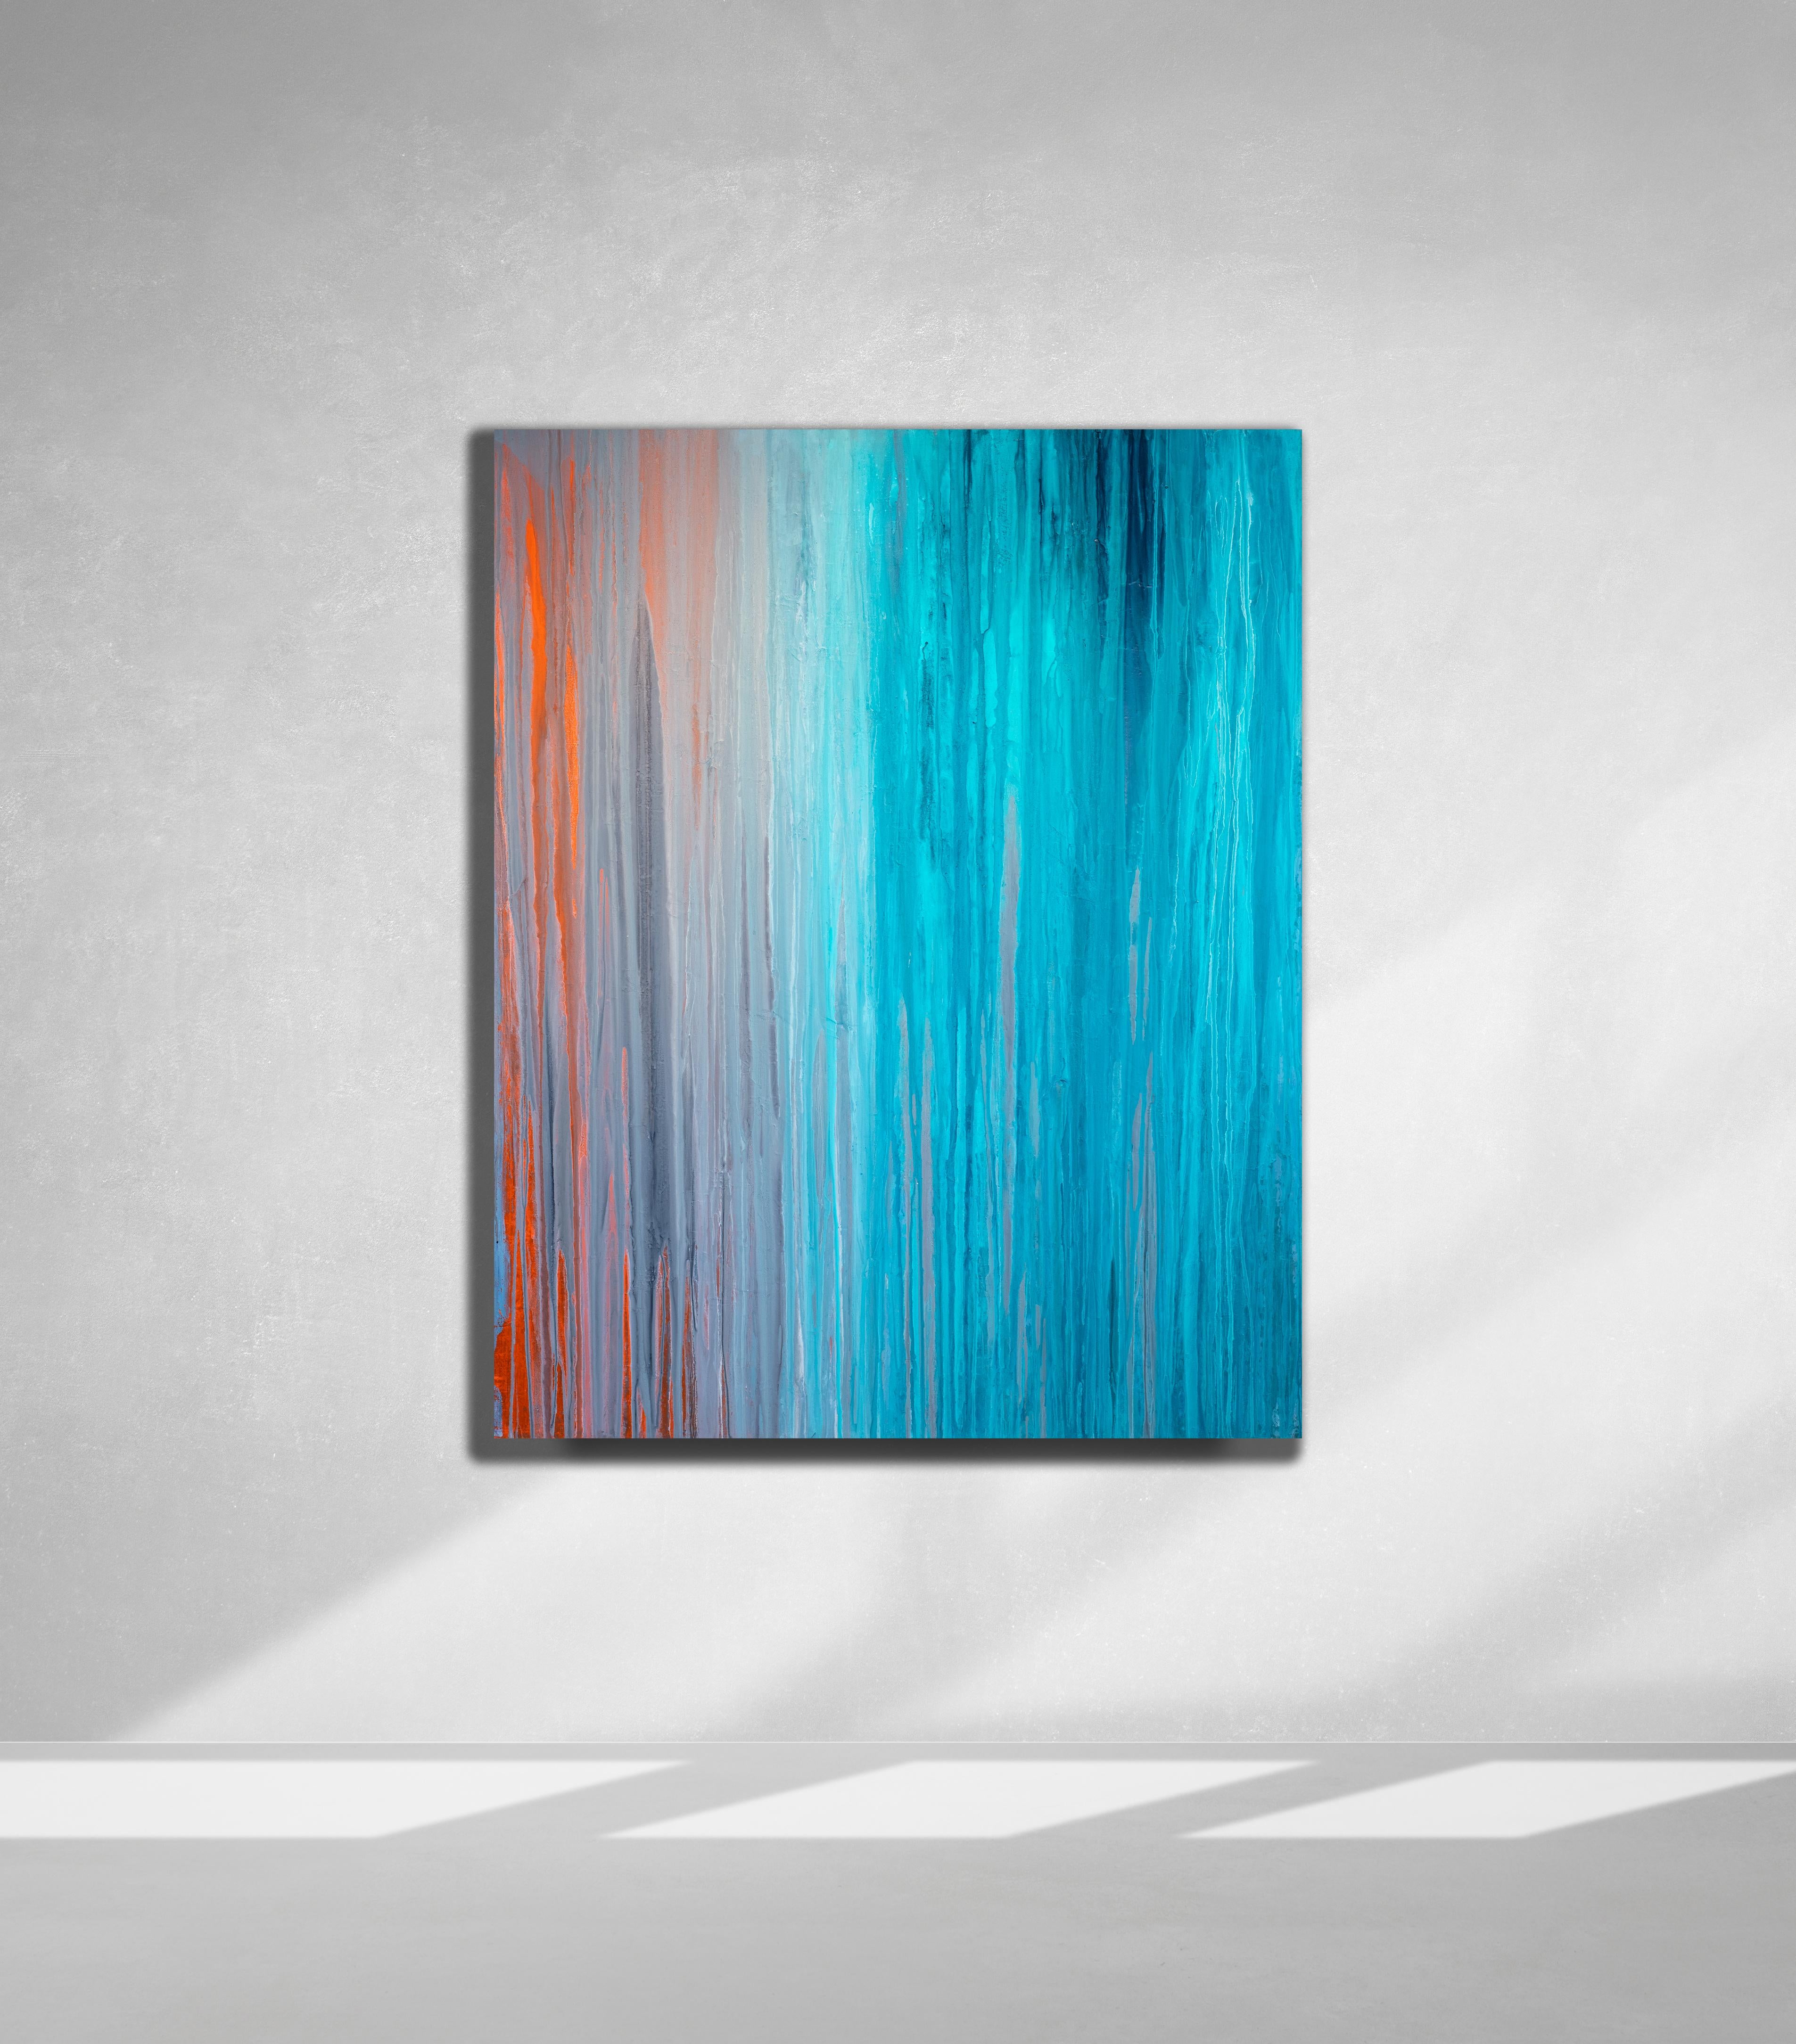 Teal, turquoise, orange, sunset, water, waterfall, blue, tranquility, coral, seaside, sea, ocean, summer, Florida, California, Caribbean, island, contemporary, minimalist, modern

BIOGRAPHY
Teodora Guererra received her Bachelor of Arts in Art